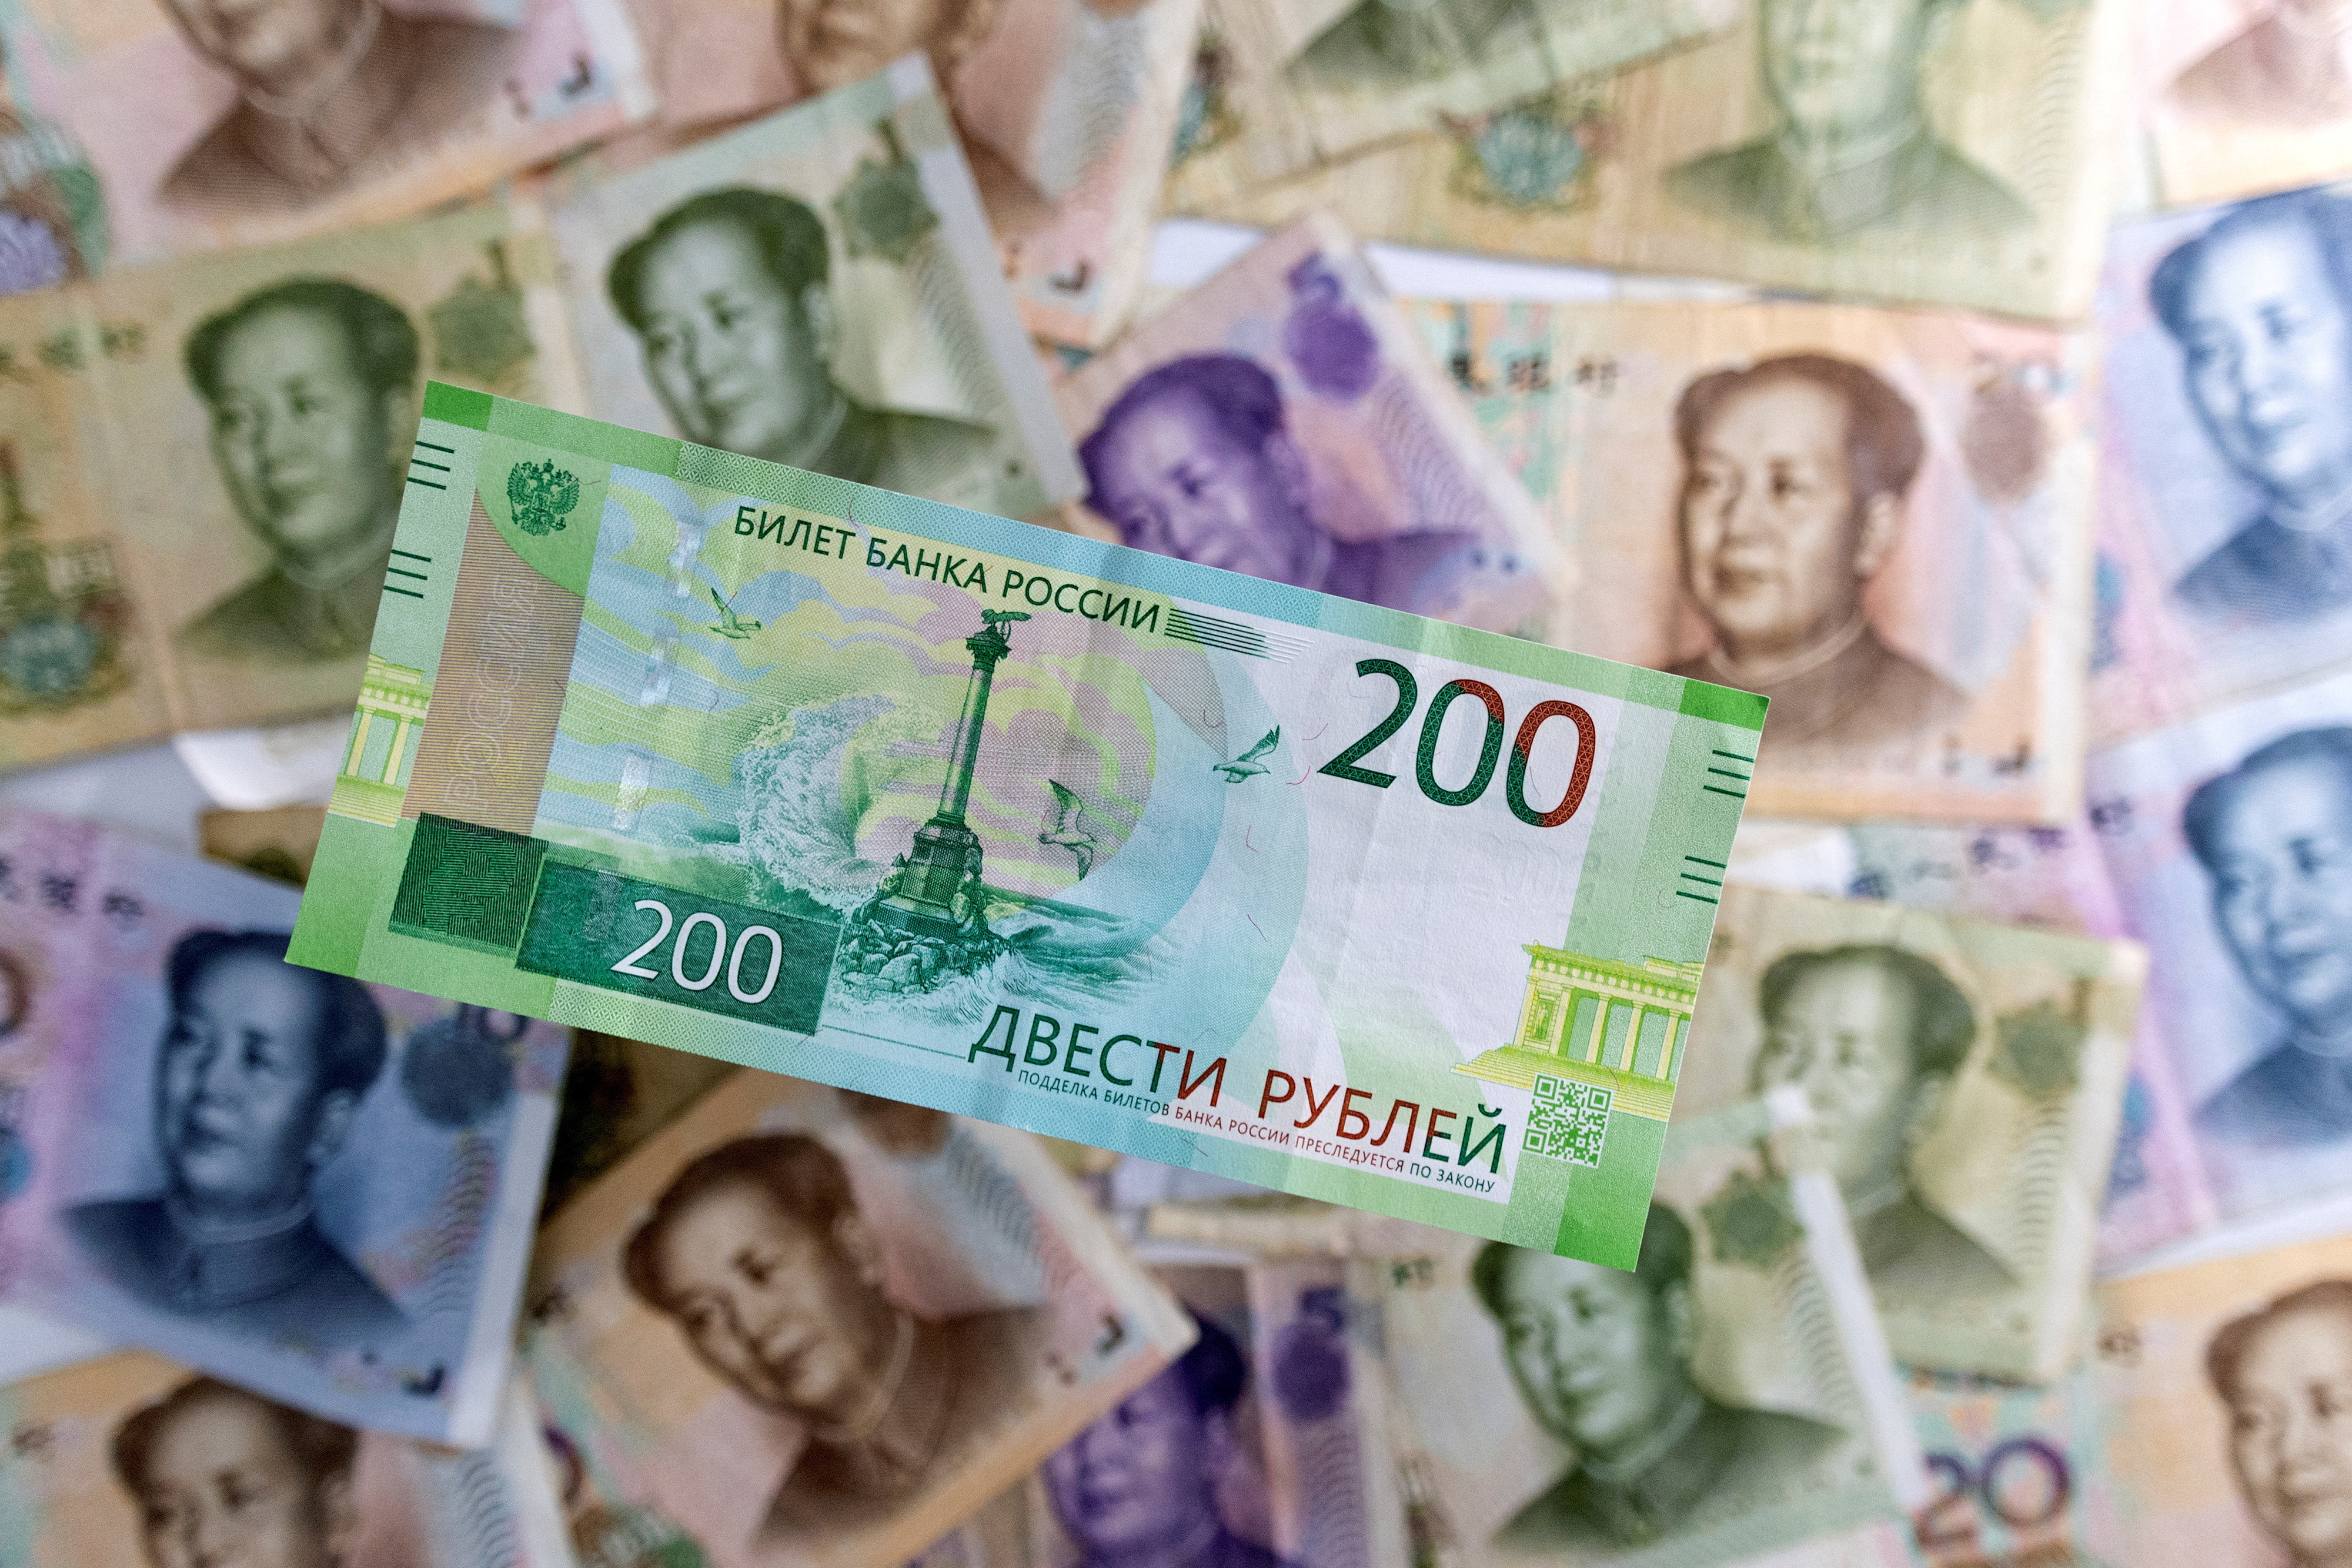 Illustration shows Russian Rouble and Chinese Yuan banknotes